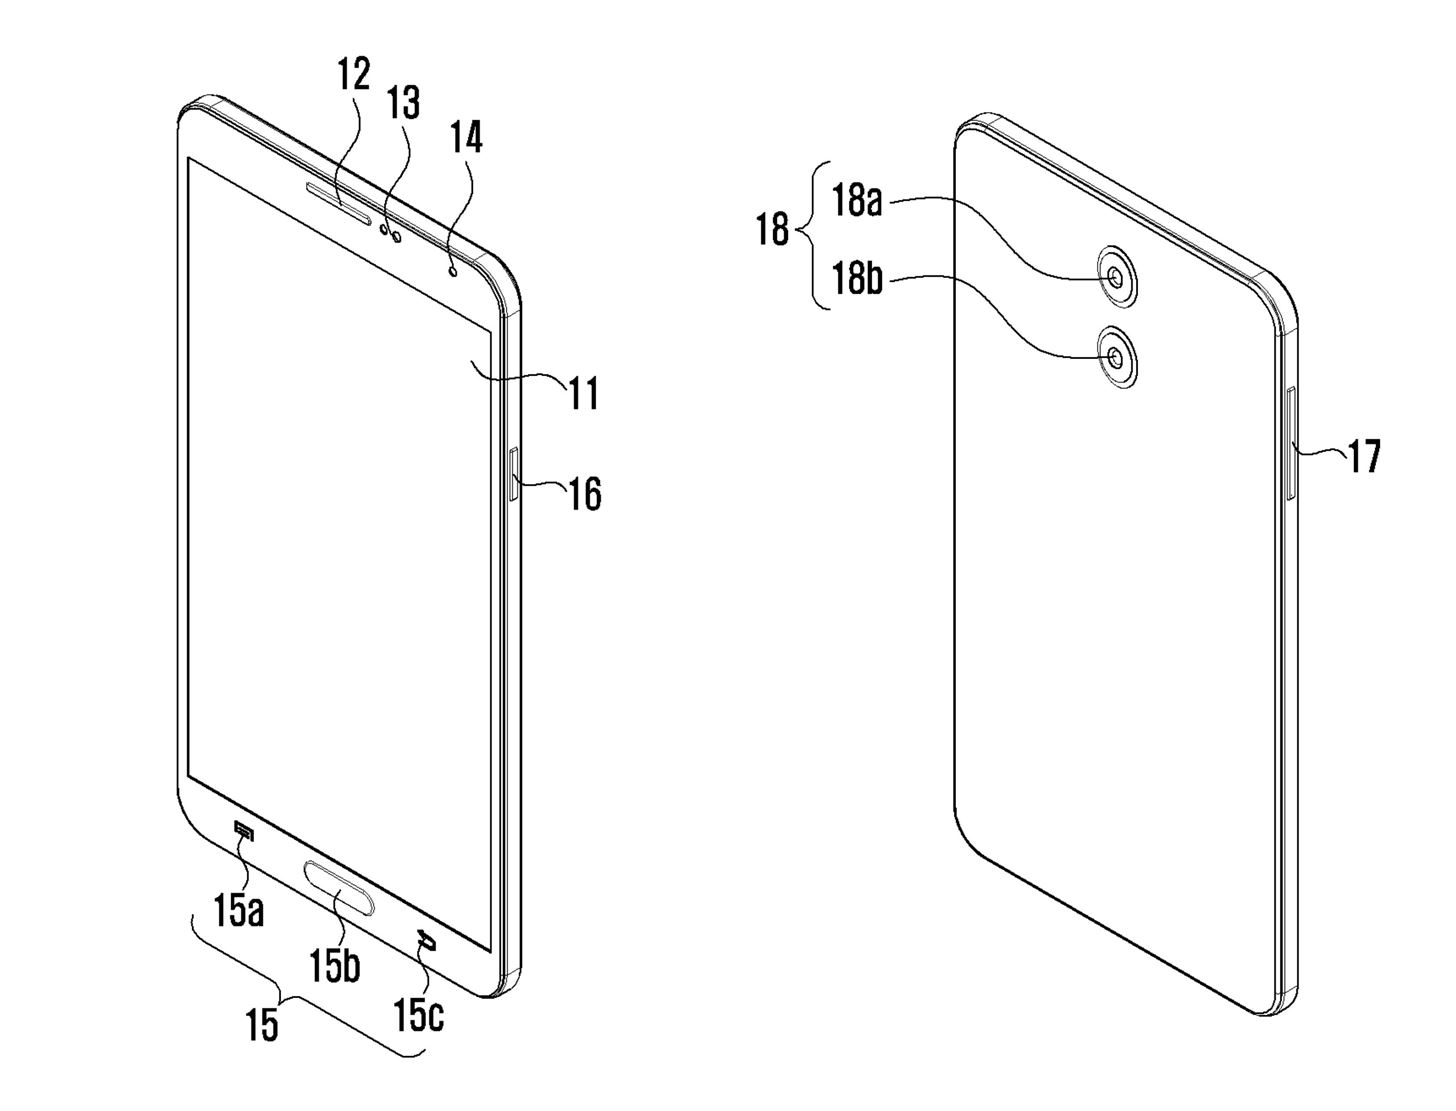 Samsung's Working on an Ultra-Thin Dual Camera System According to a New Patent